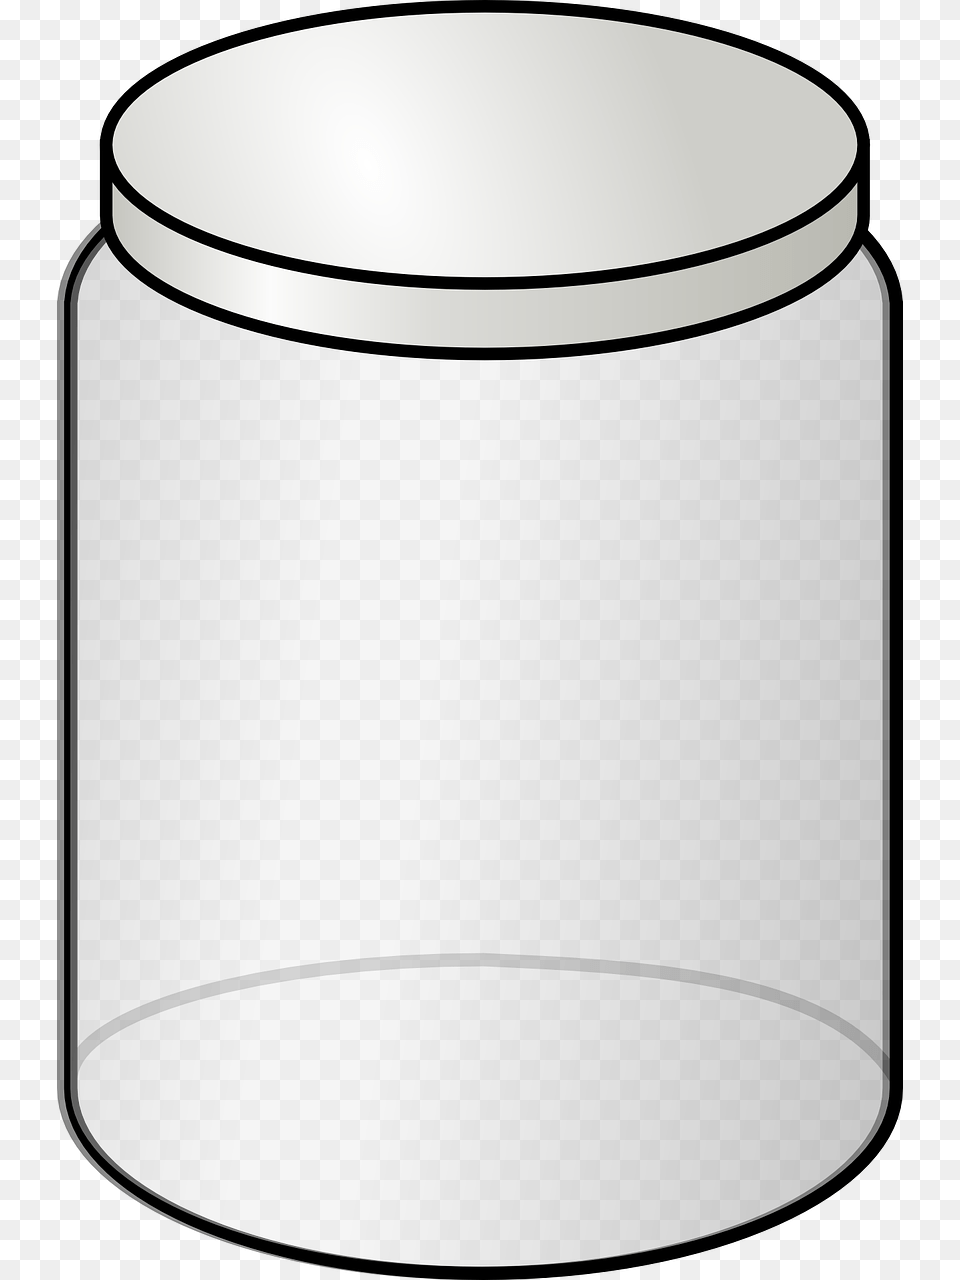 Jar Clipart Plastic Container, Cylinder Png